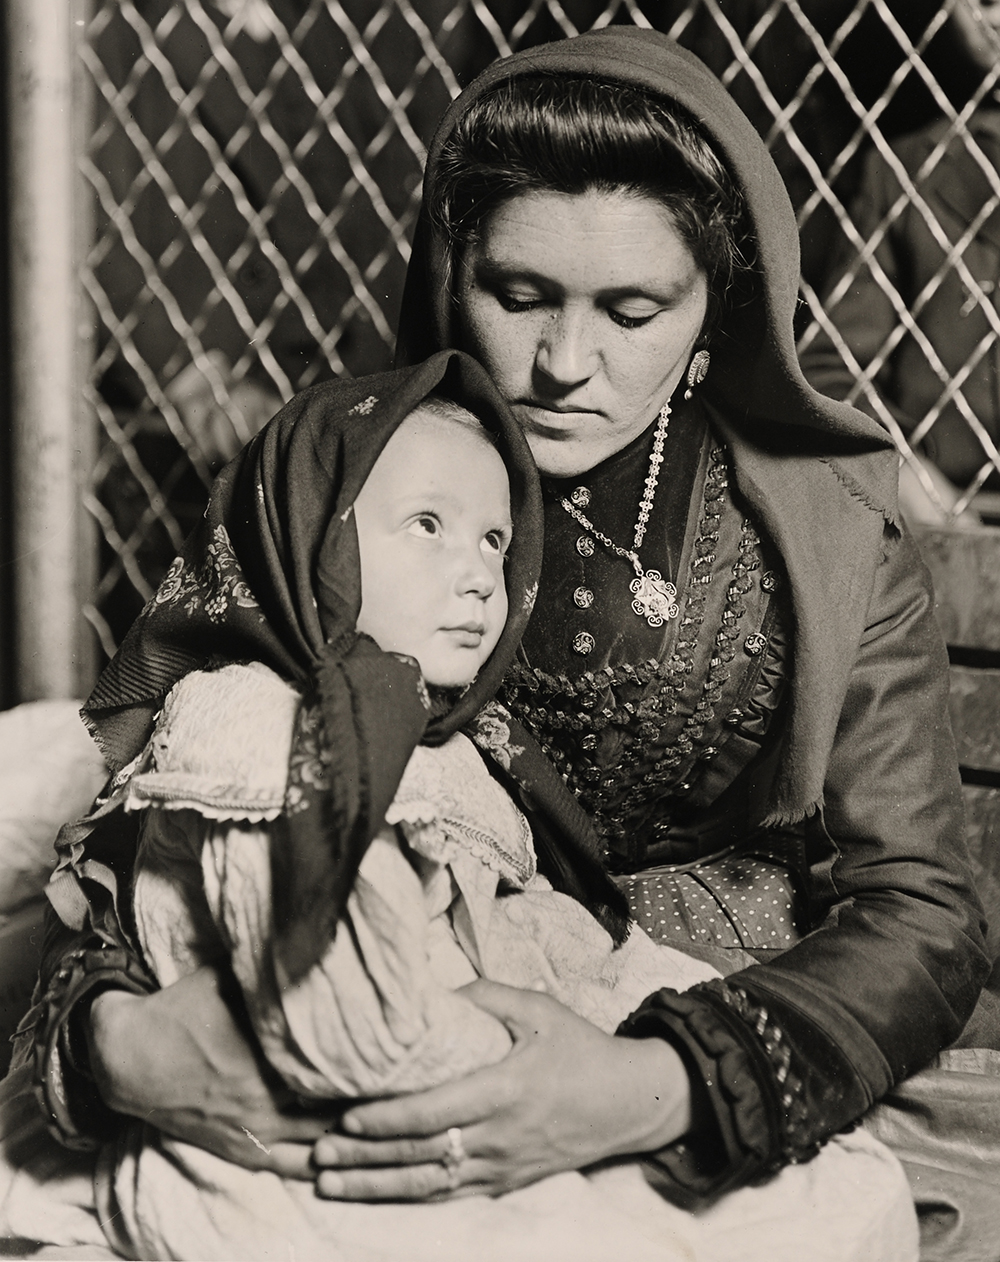 An Italian mother and child who have just arrived at Ellis Island along with hundreds of other immigrants in search of a better life, 1905. Photograph by Lewis Wickes Hine. Wikimedia Commons.